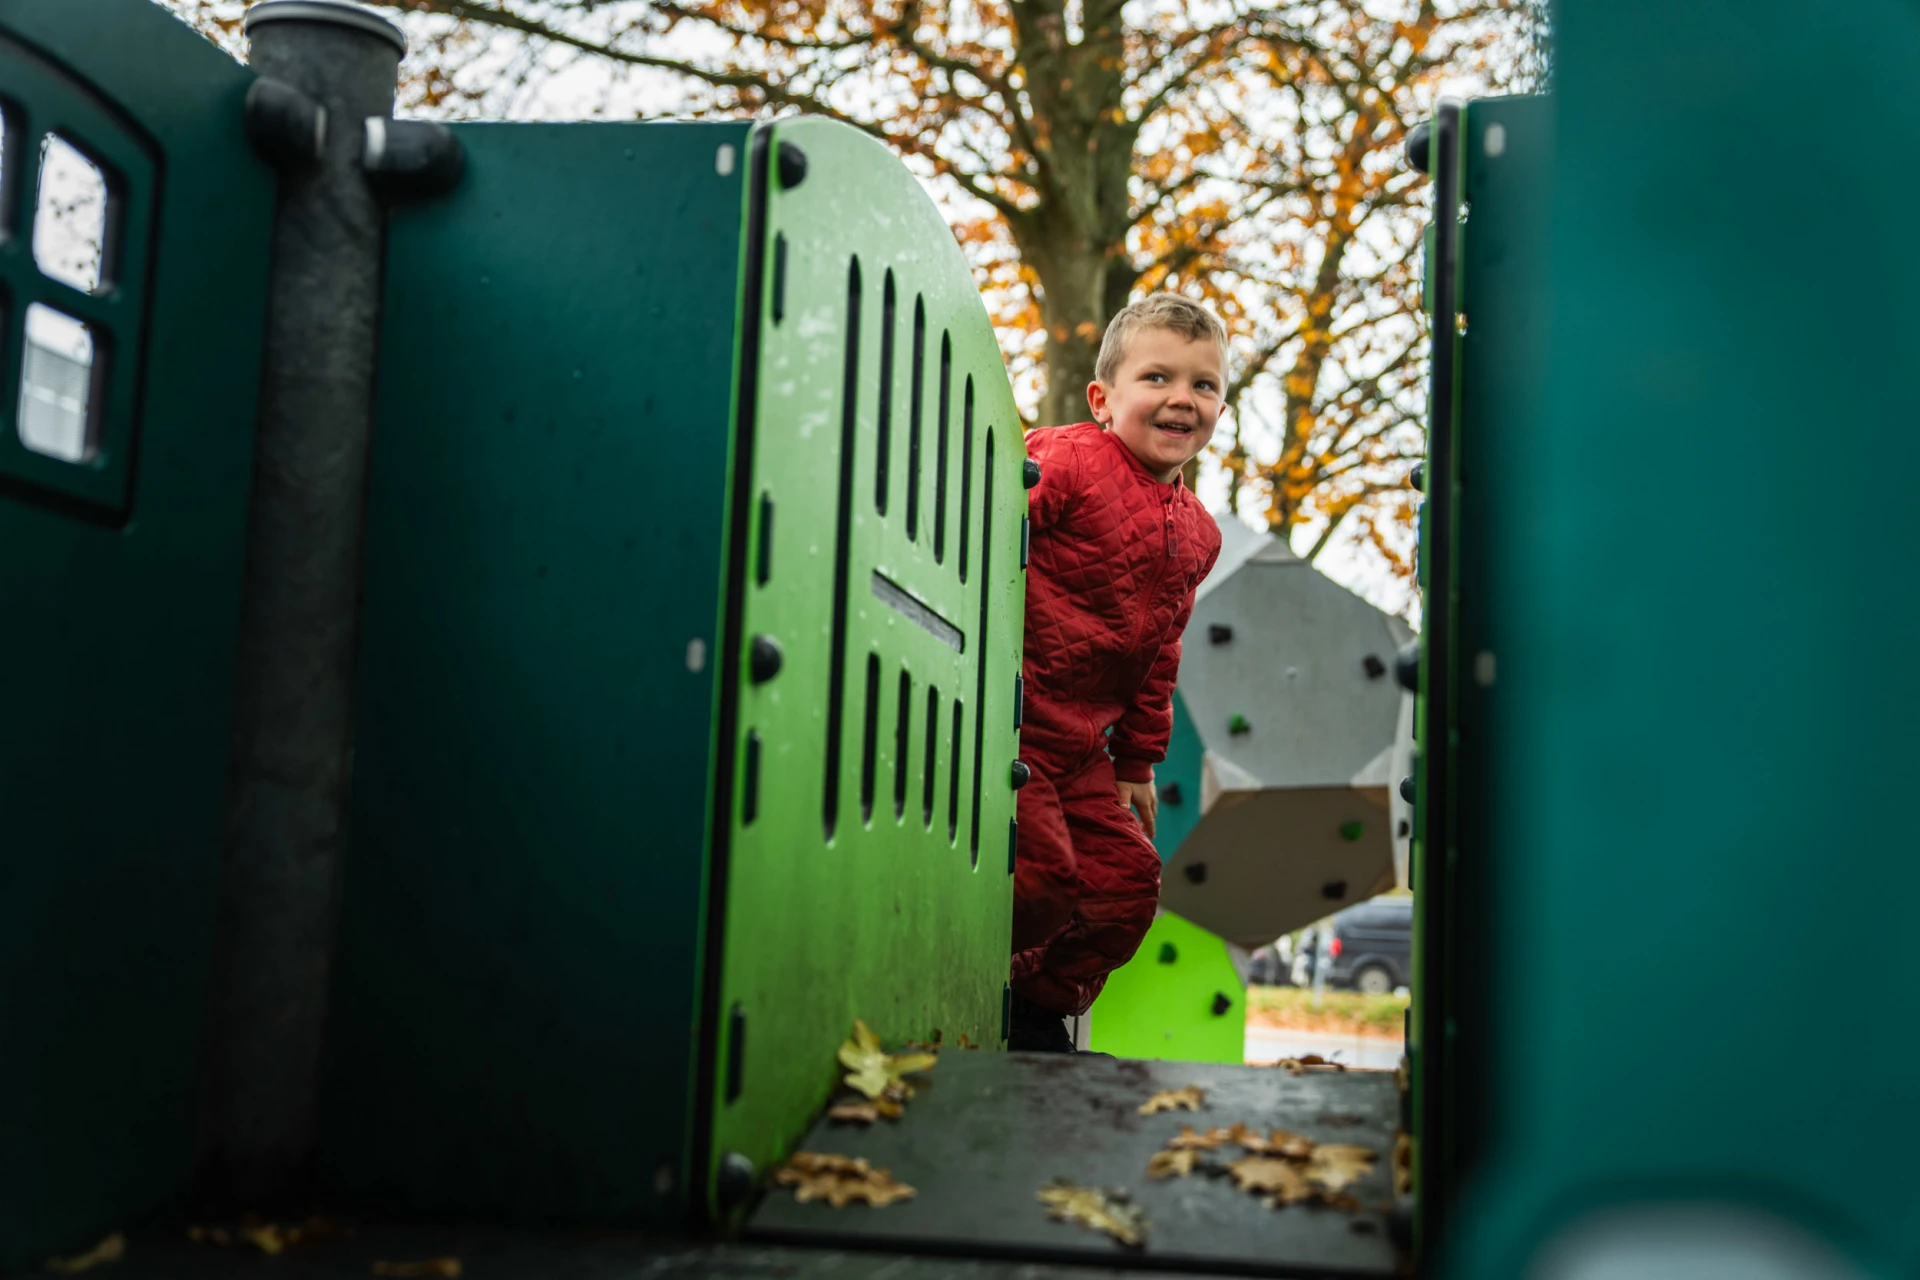 Boy in red clothes playing on a green playground structure